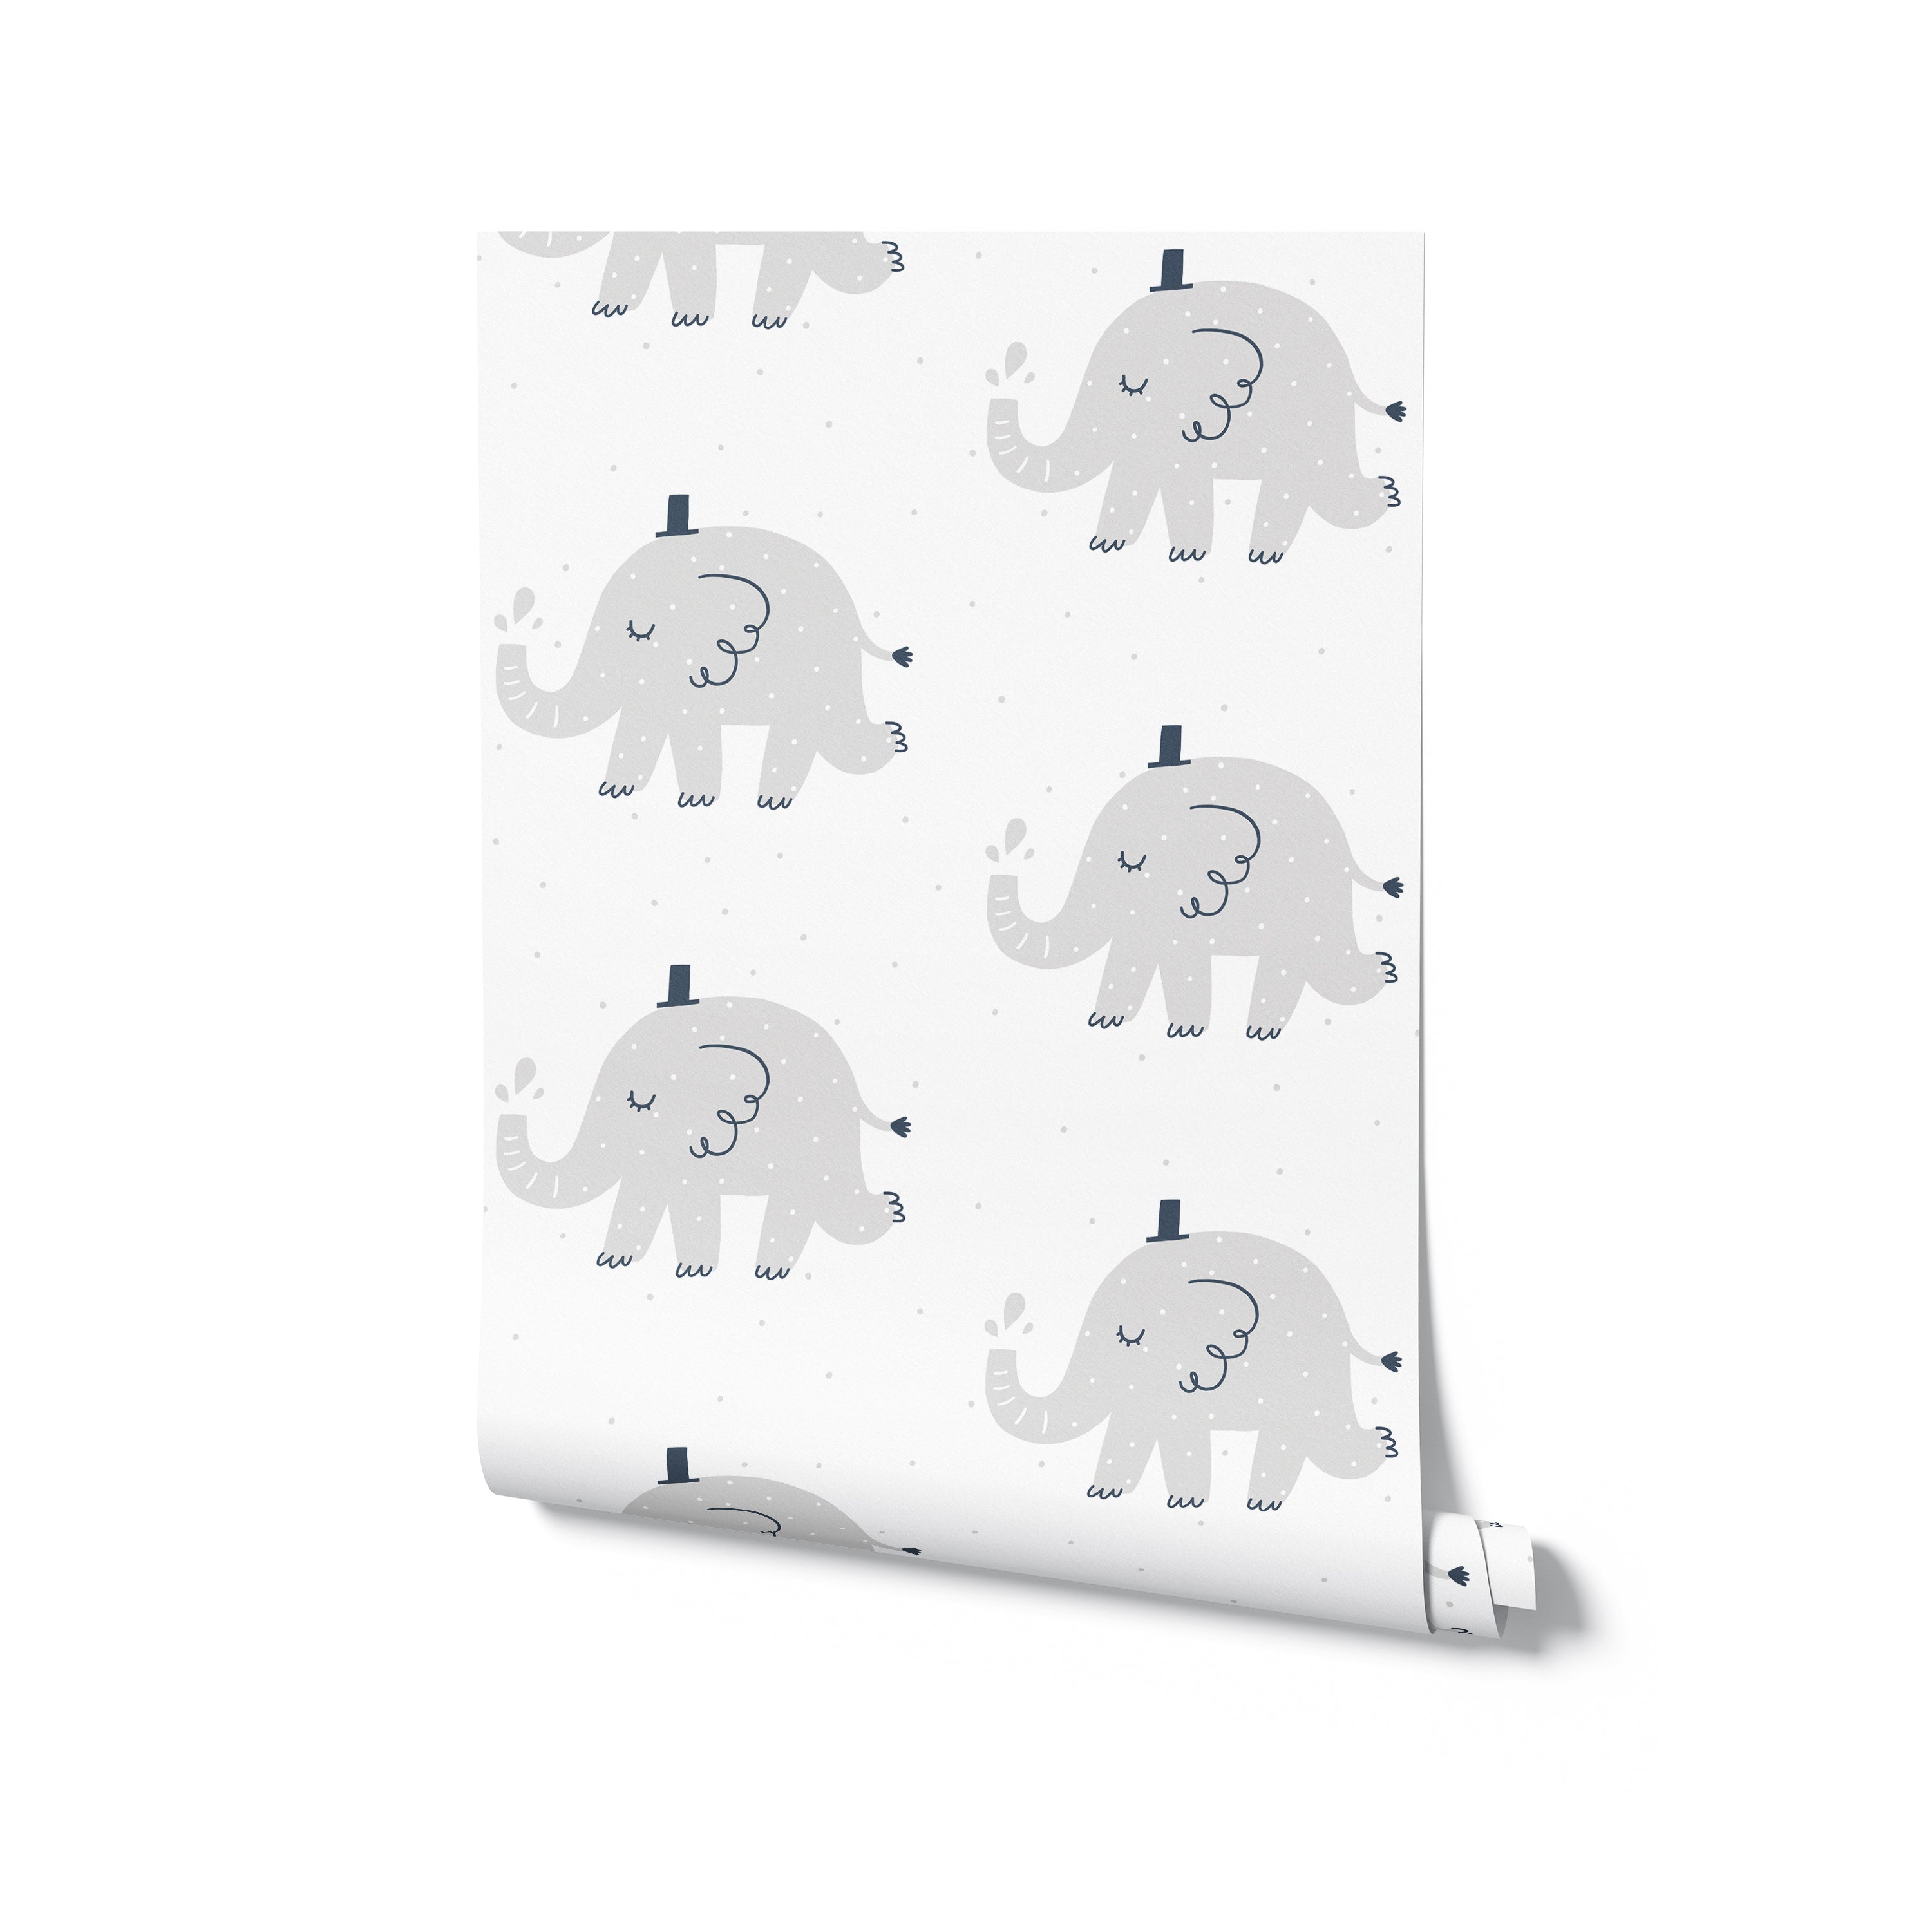 Rolled sample of Elephant Party Wallpaper showing a repeating pattern of adorable gray elephants with top hats and playful gestures, set against a white background with scattered dots, perfect for adding a whimsical touch to any child’s space.